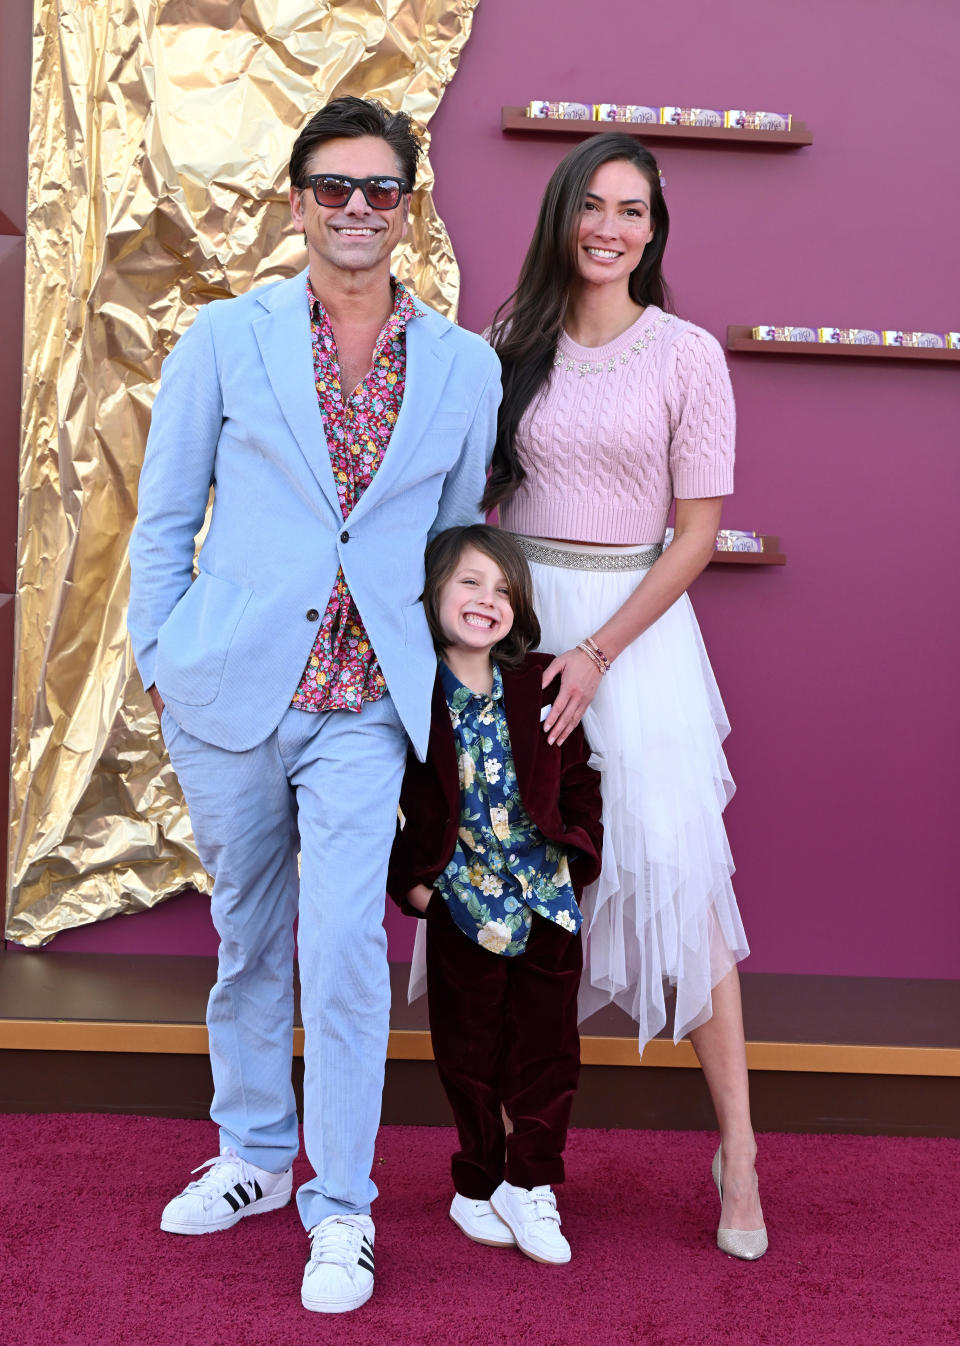 the family dressed up on the red carpet